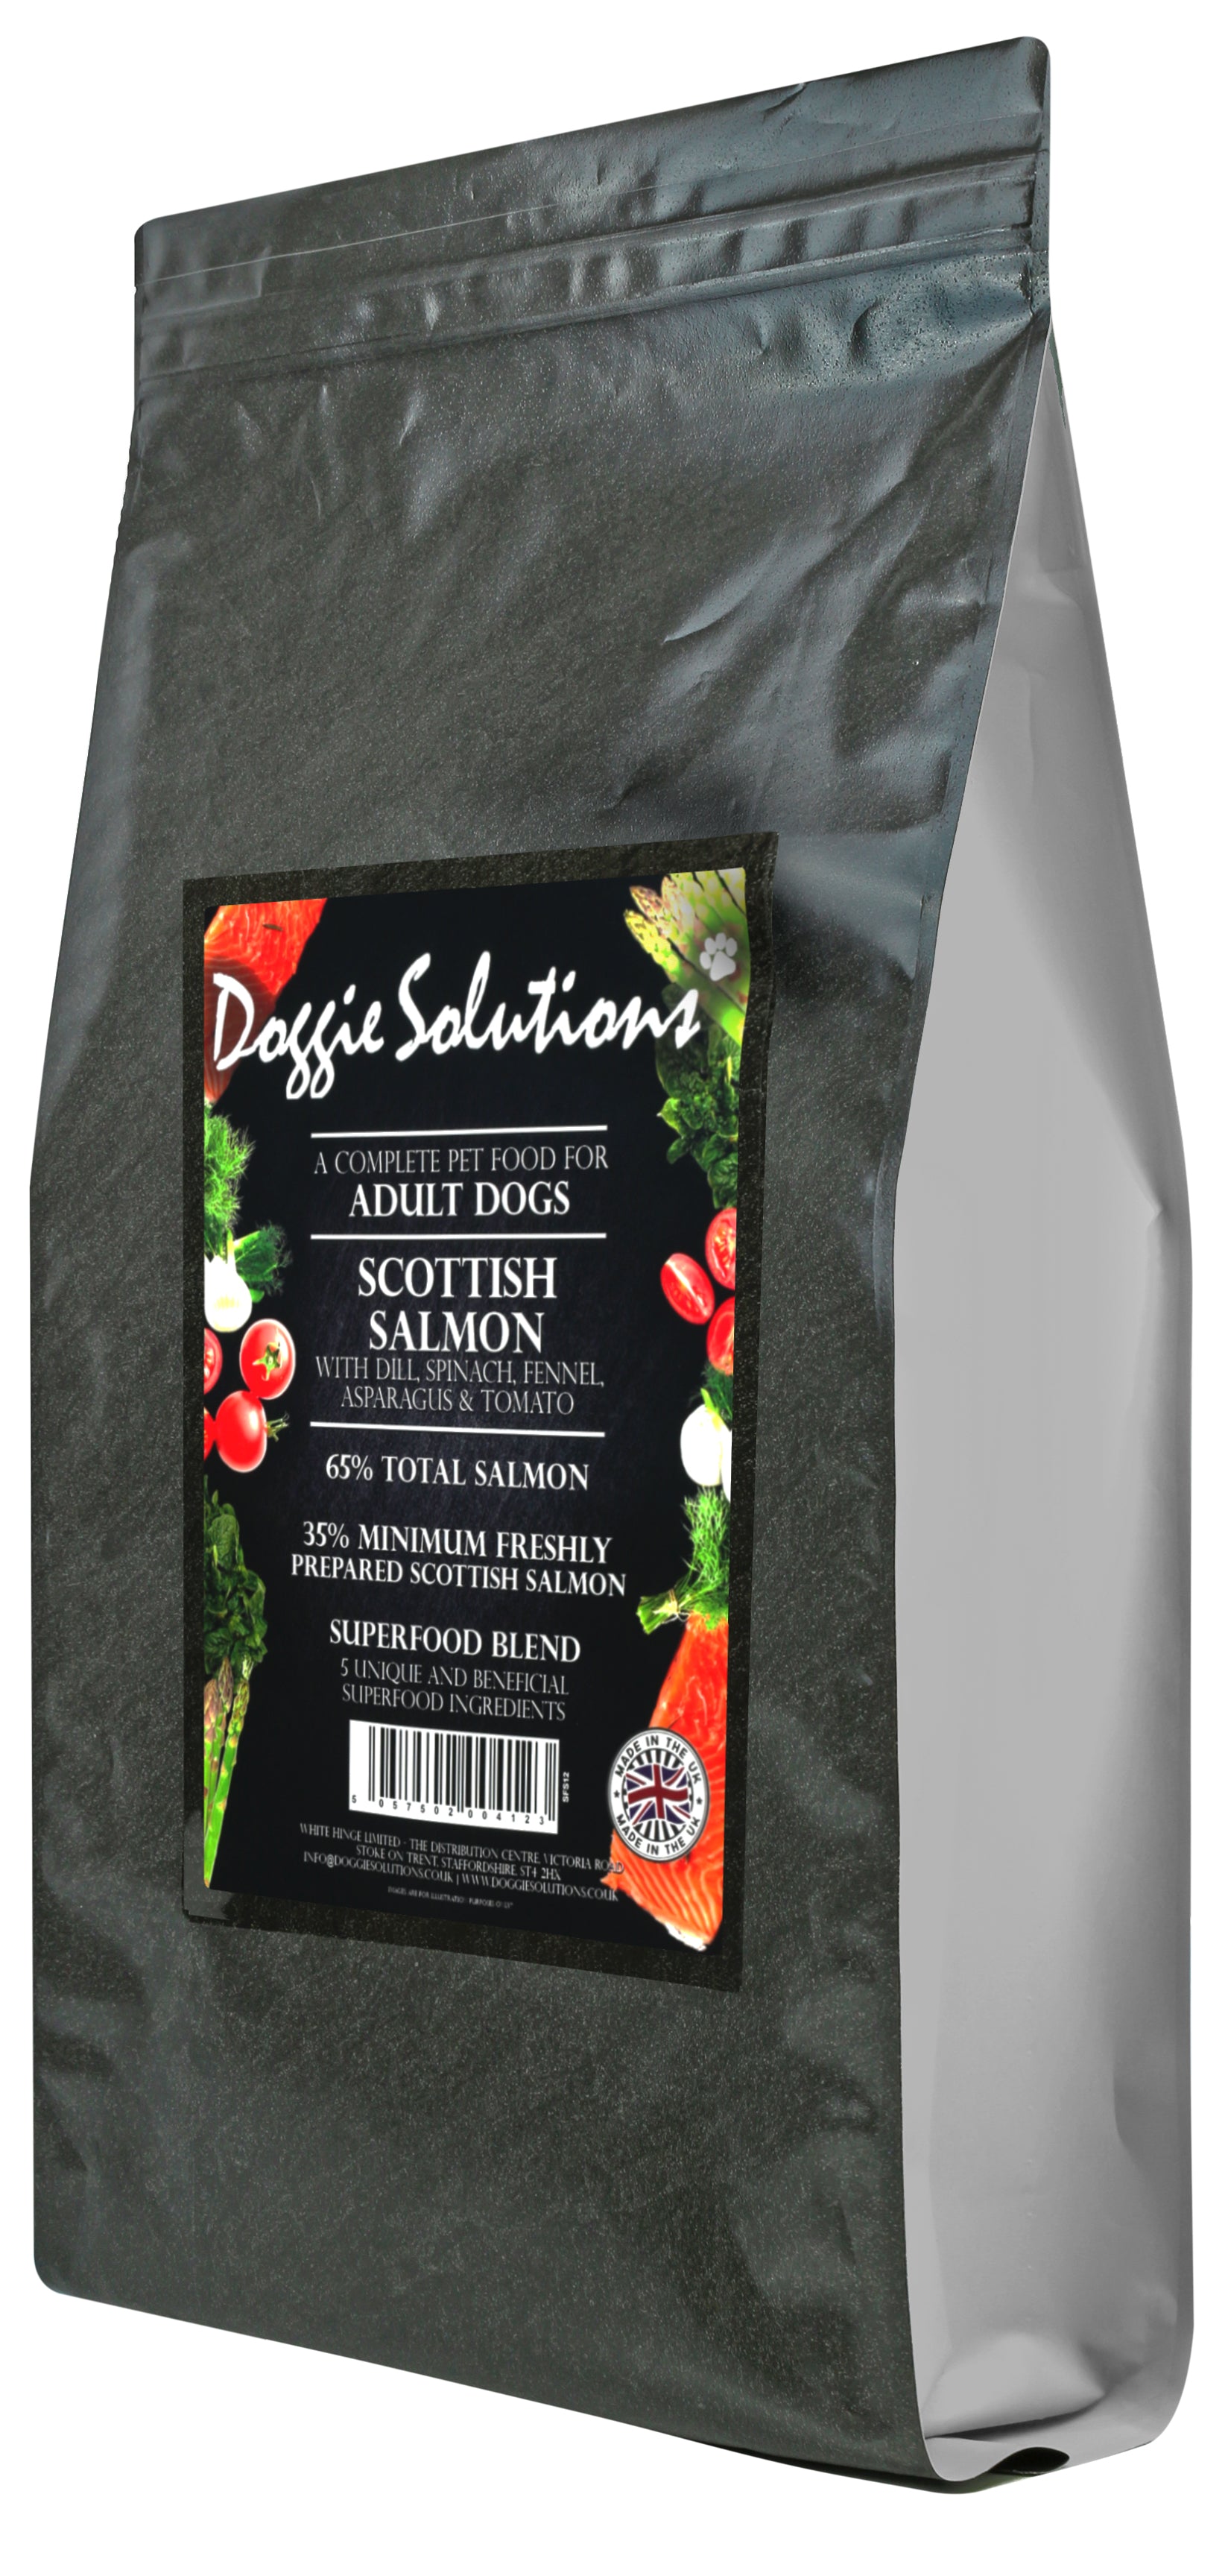 Image of Doggie Solutions Scottish Salmon with Dill, Spinach Fennel, Asparagus & Tomato Dog Food 12kg